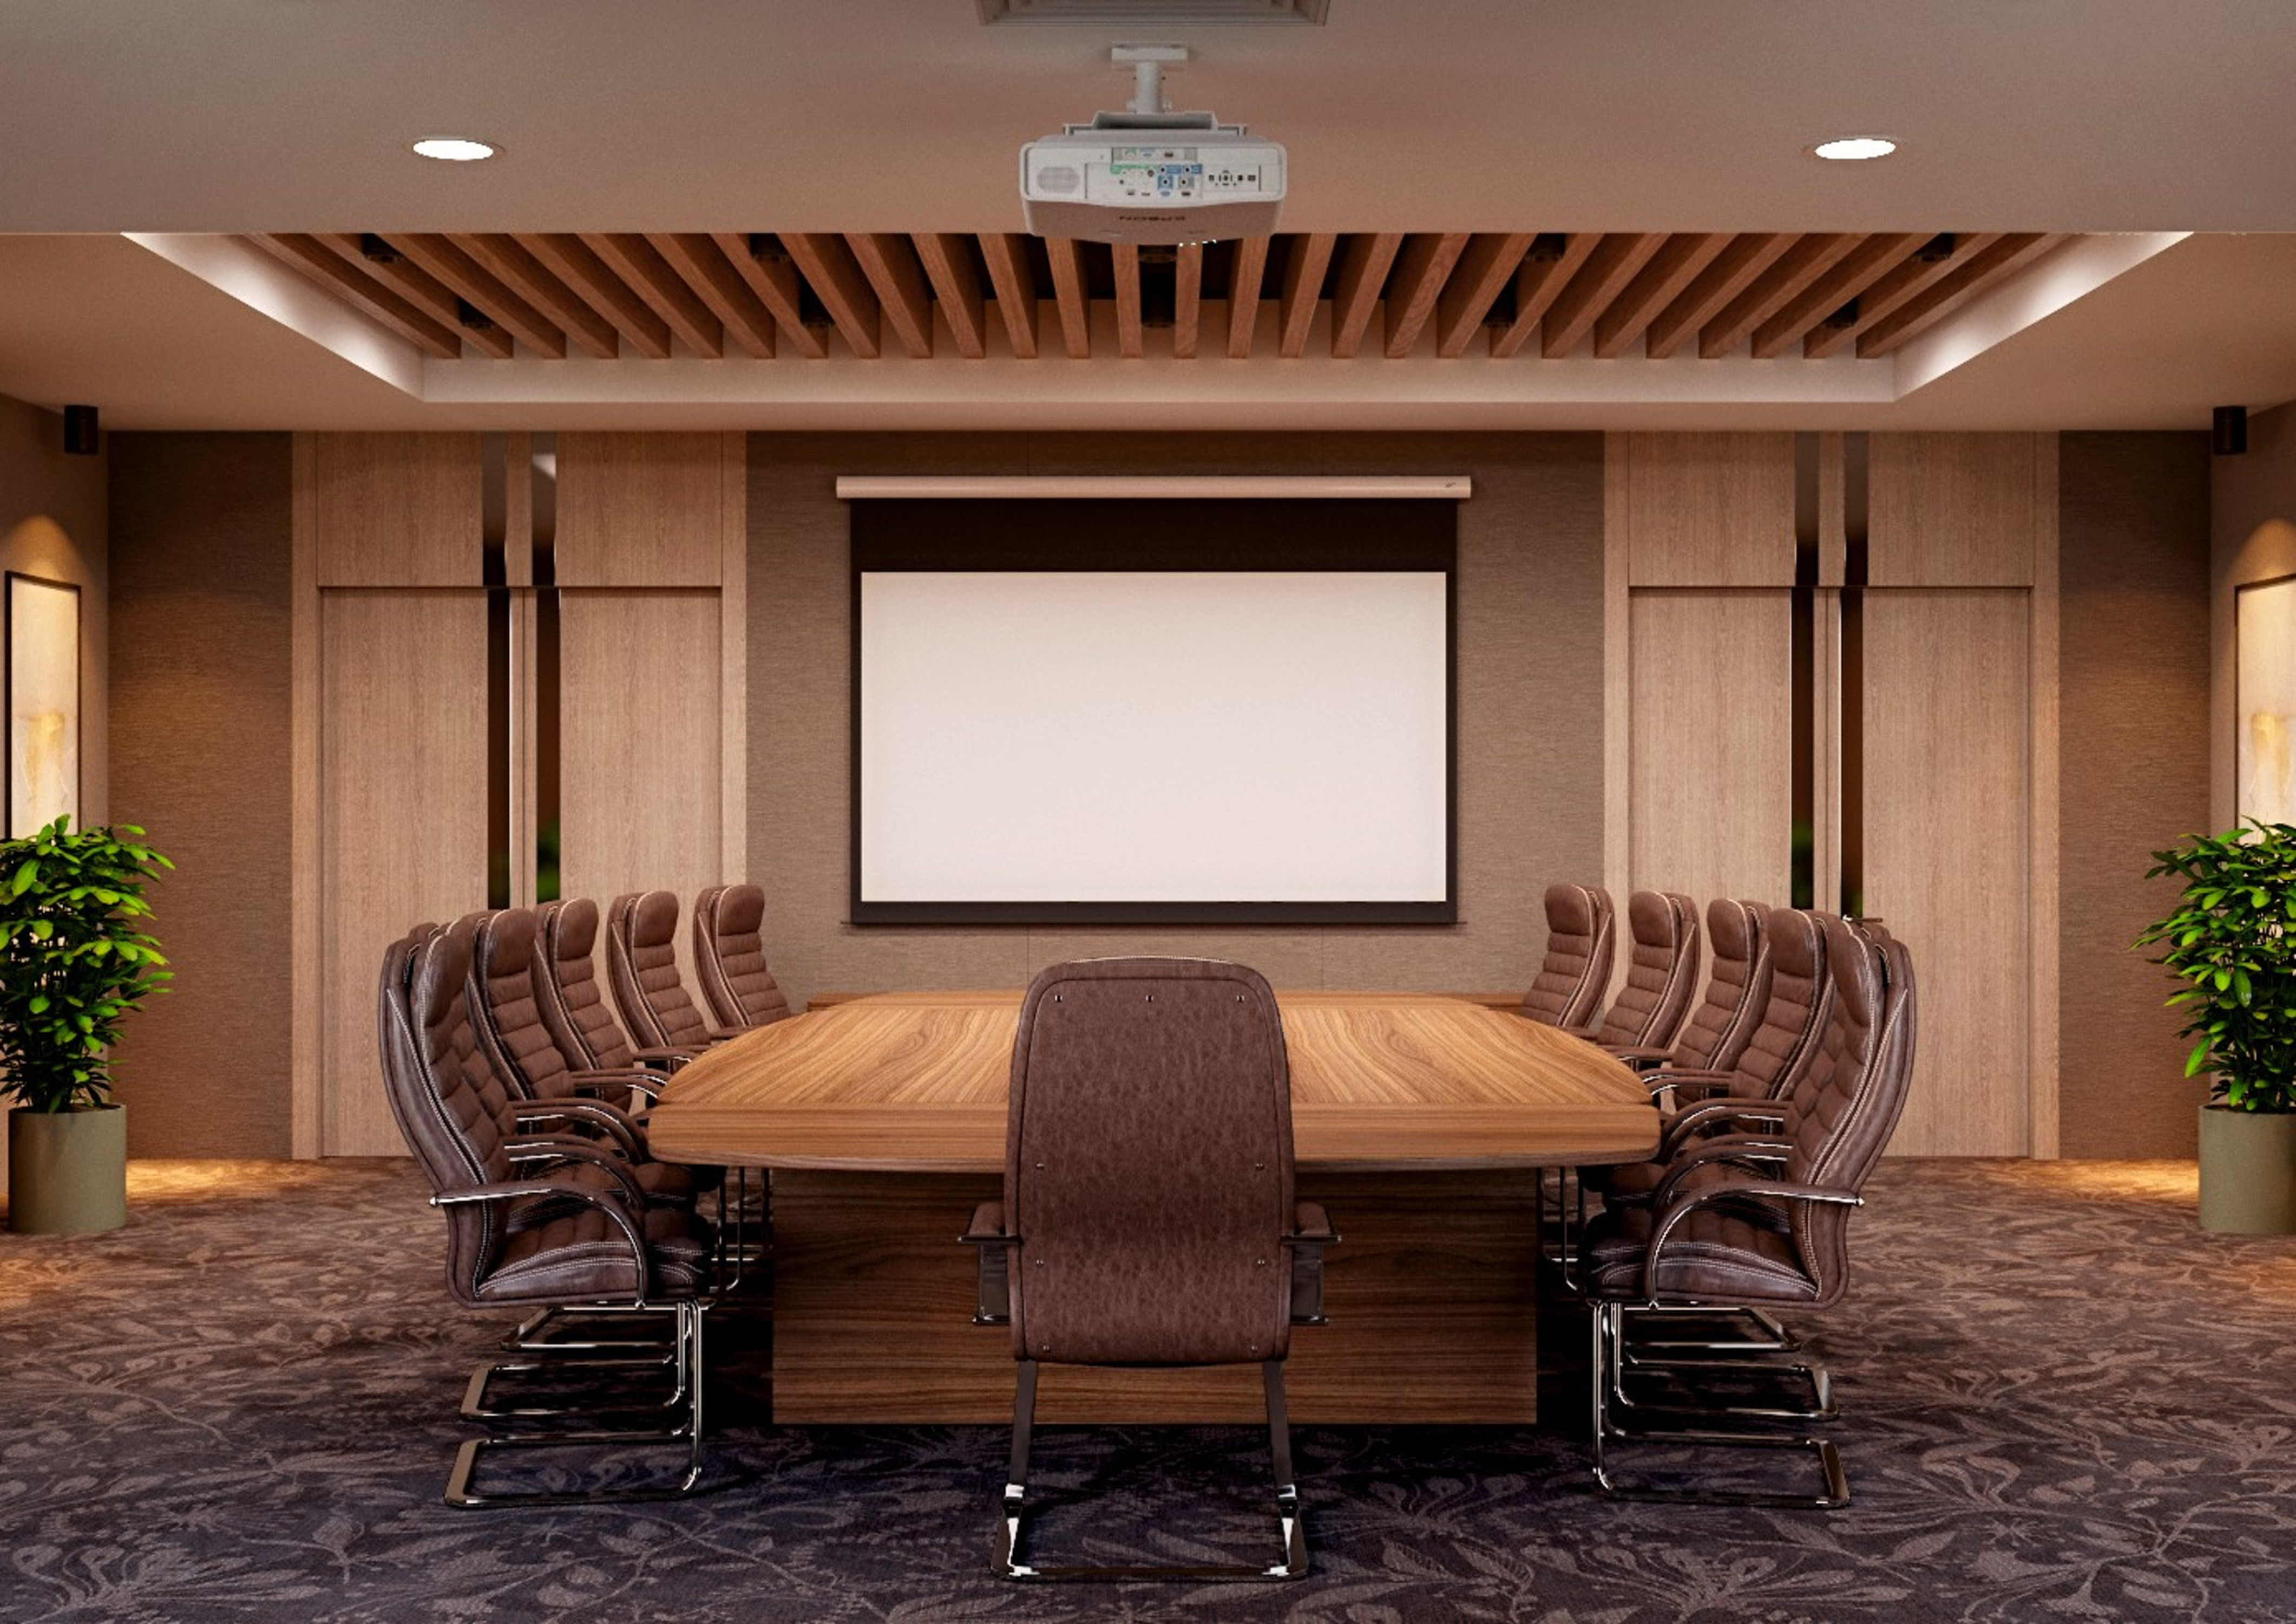 Meeting Room with Large Table, Office Chairs and Projector Screen